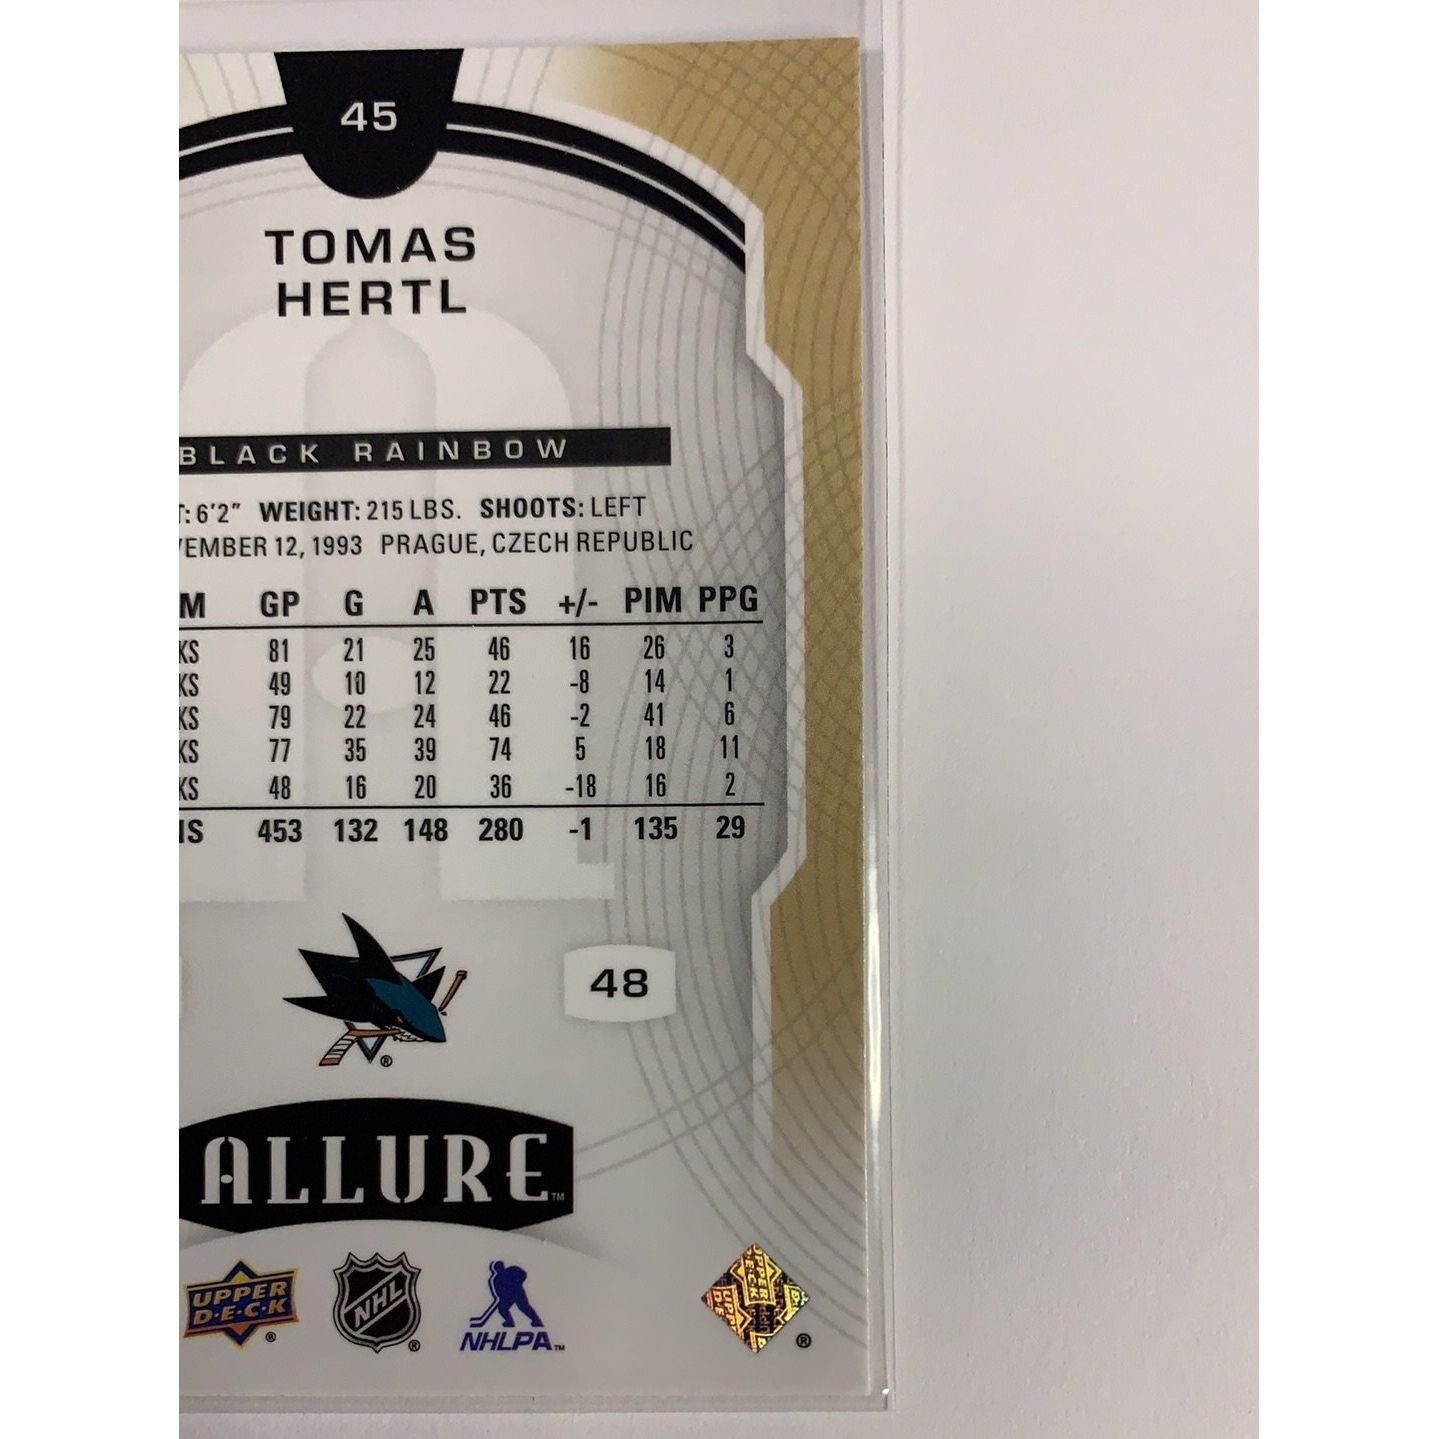  2020-21 Allure Tomas Hertl Black Rainbow  Local Legends Cards & Collectibles